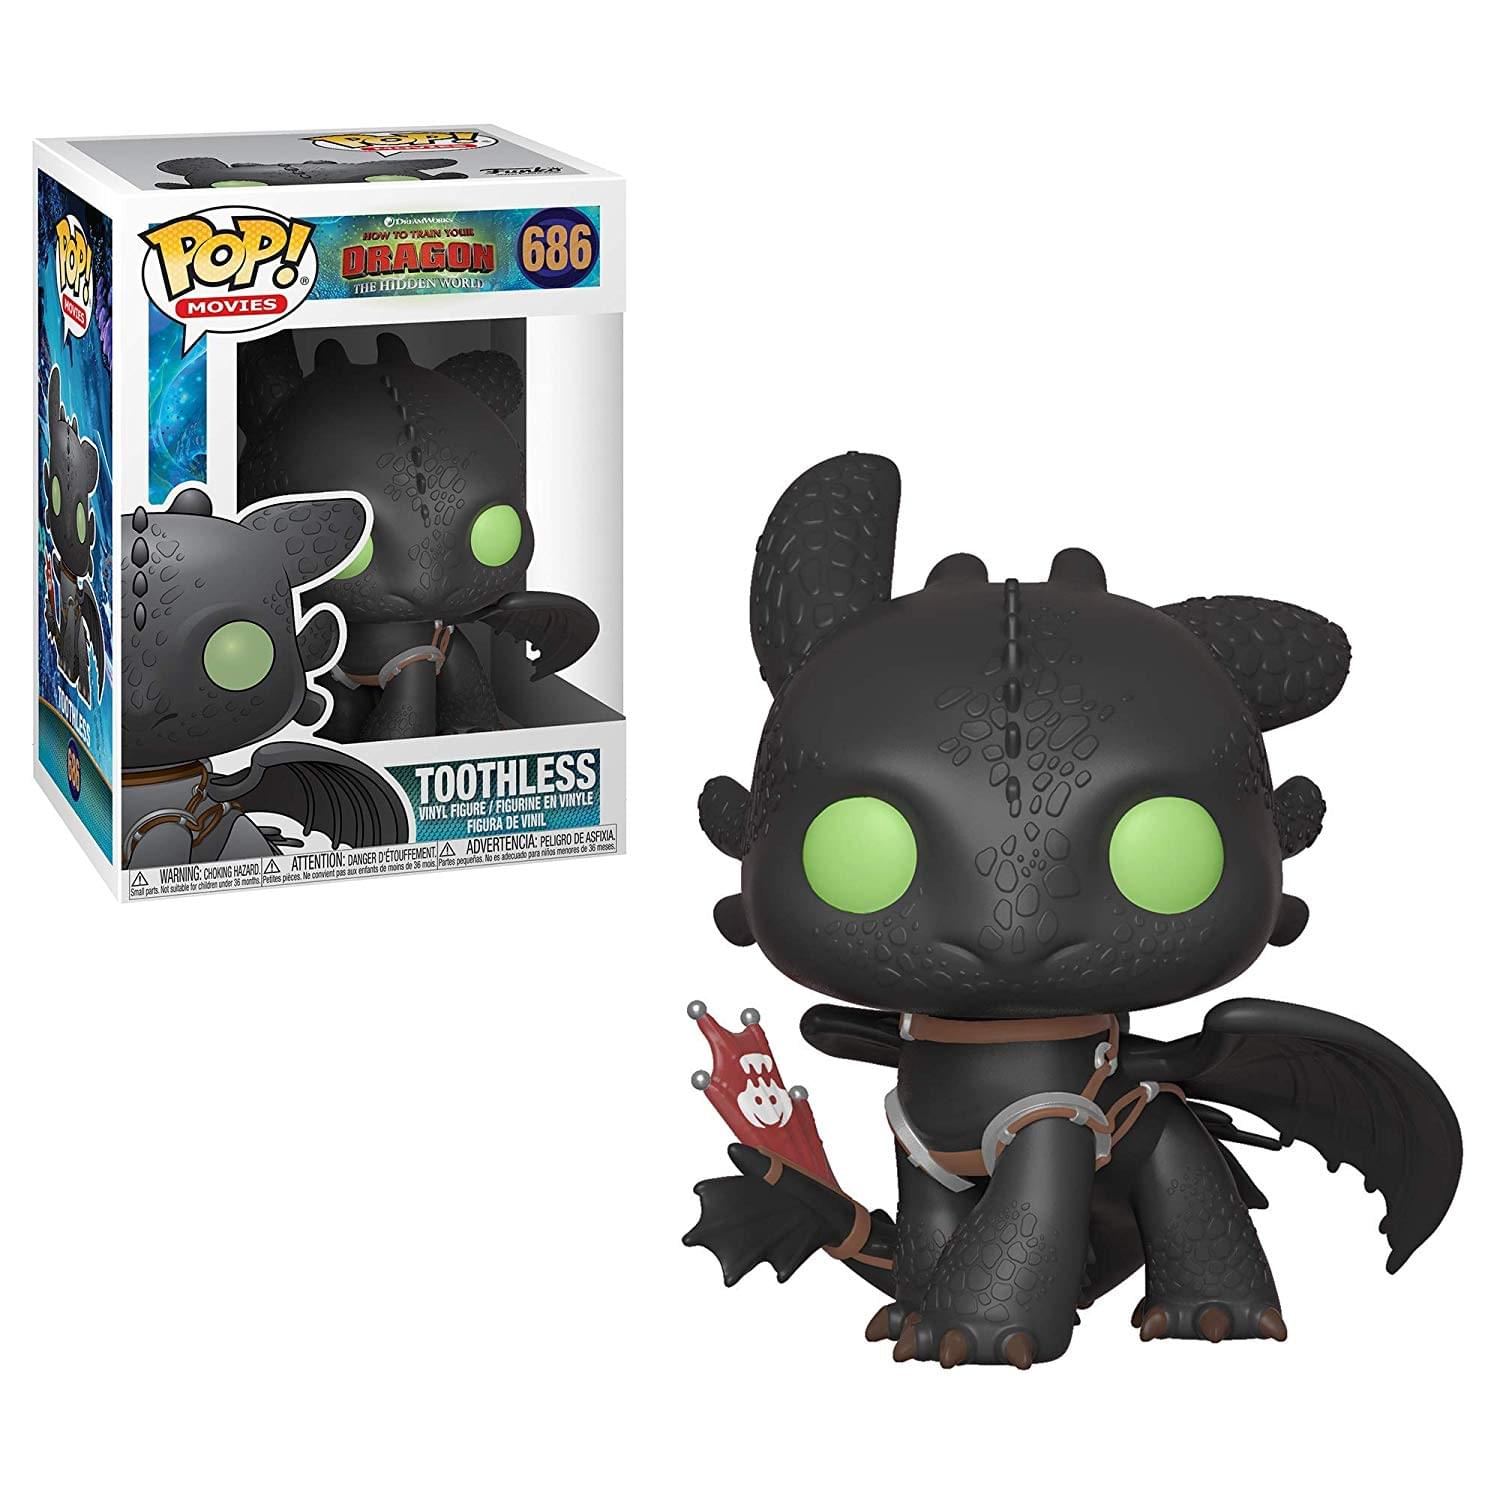 How to Train Your Dragon 3 Funko POP Vinyl Figure - Toothless